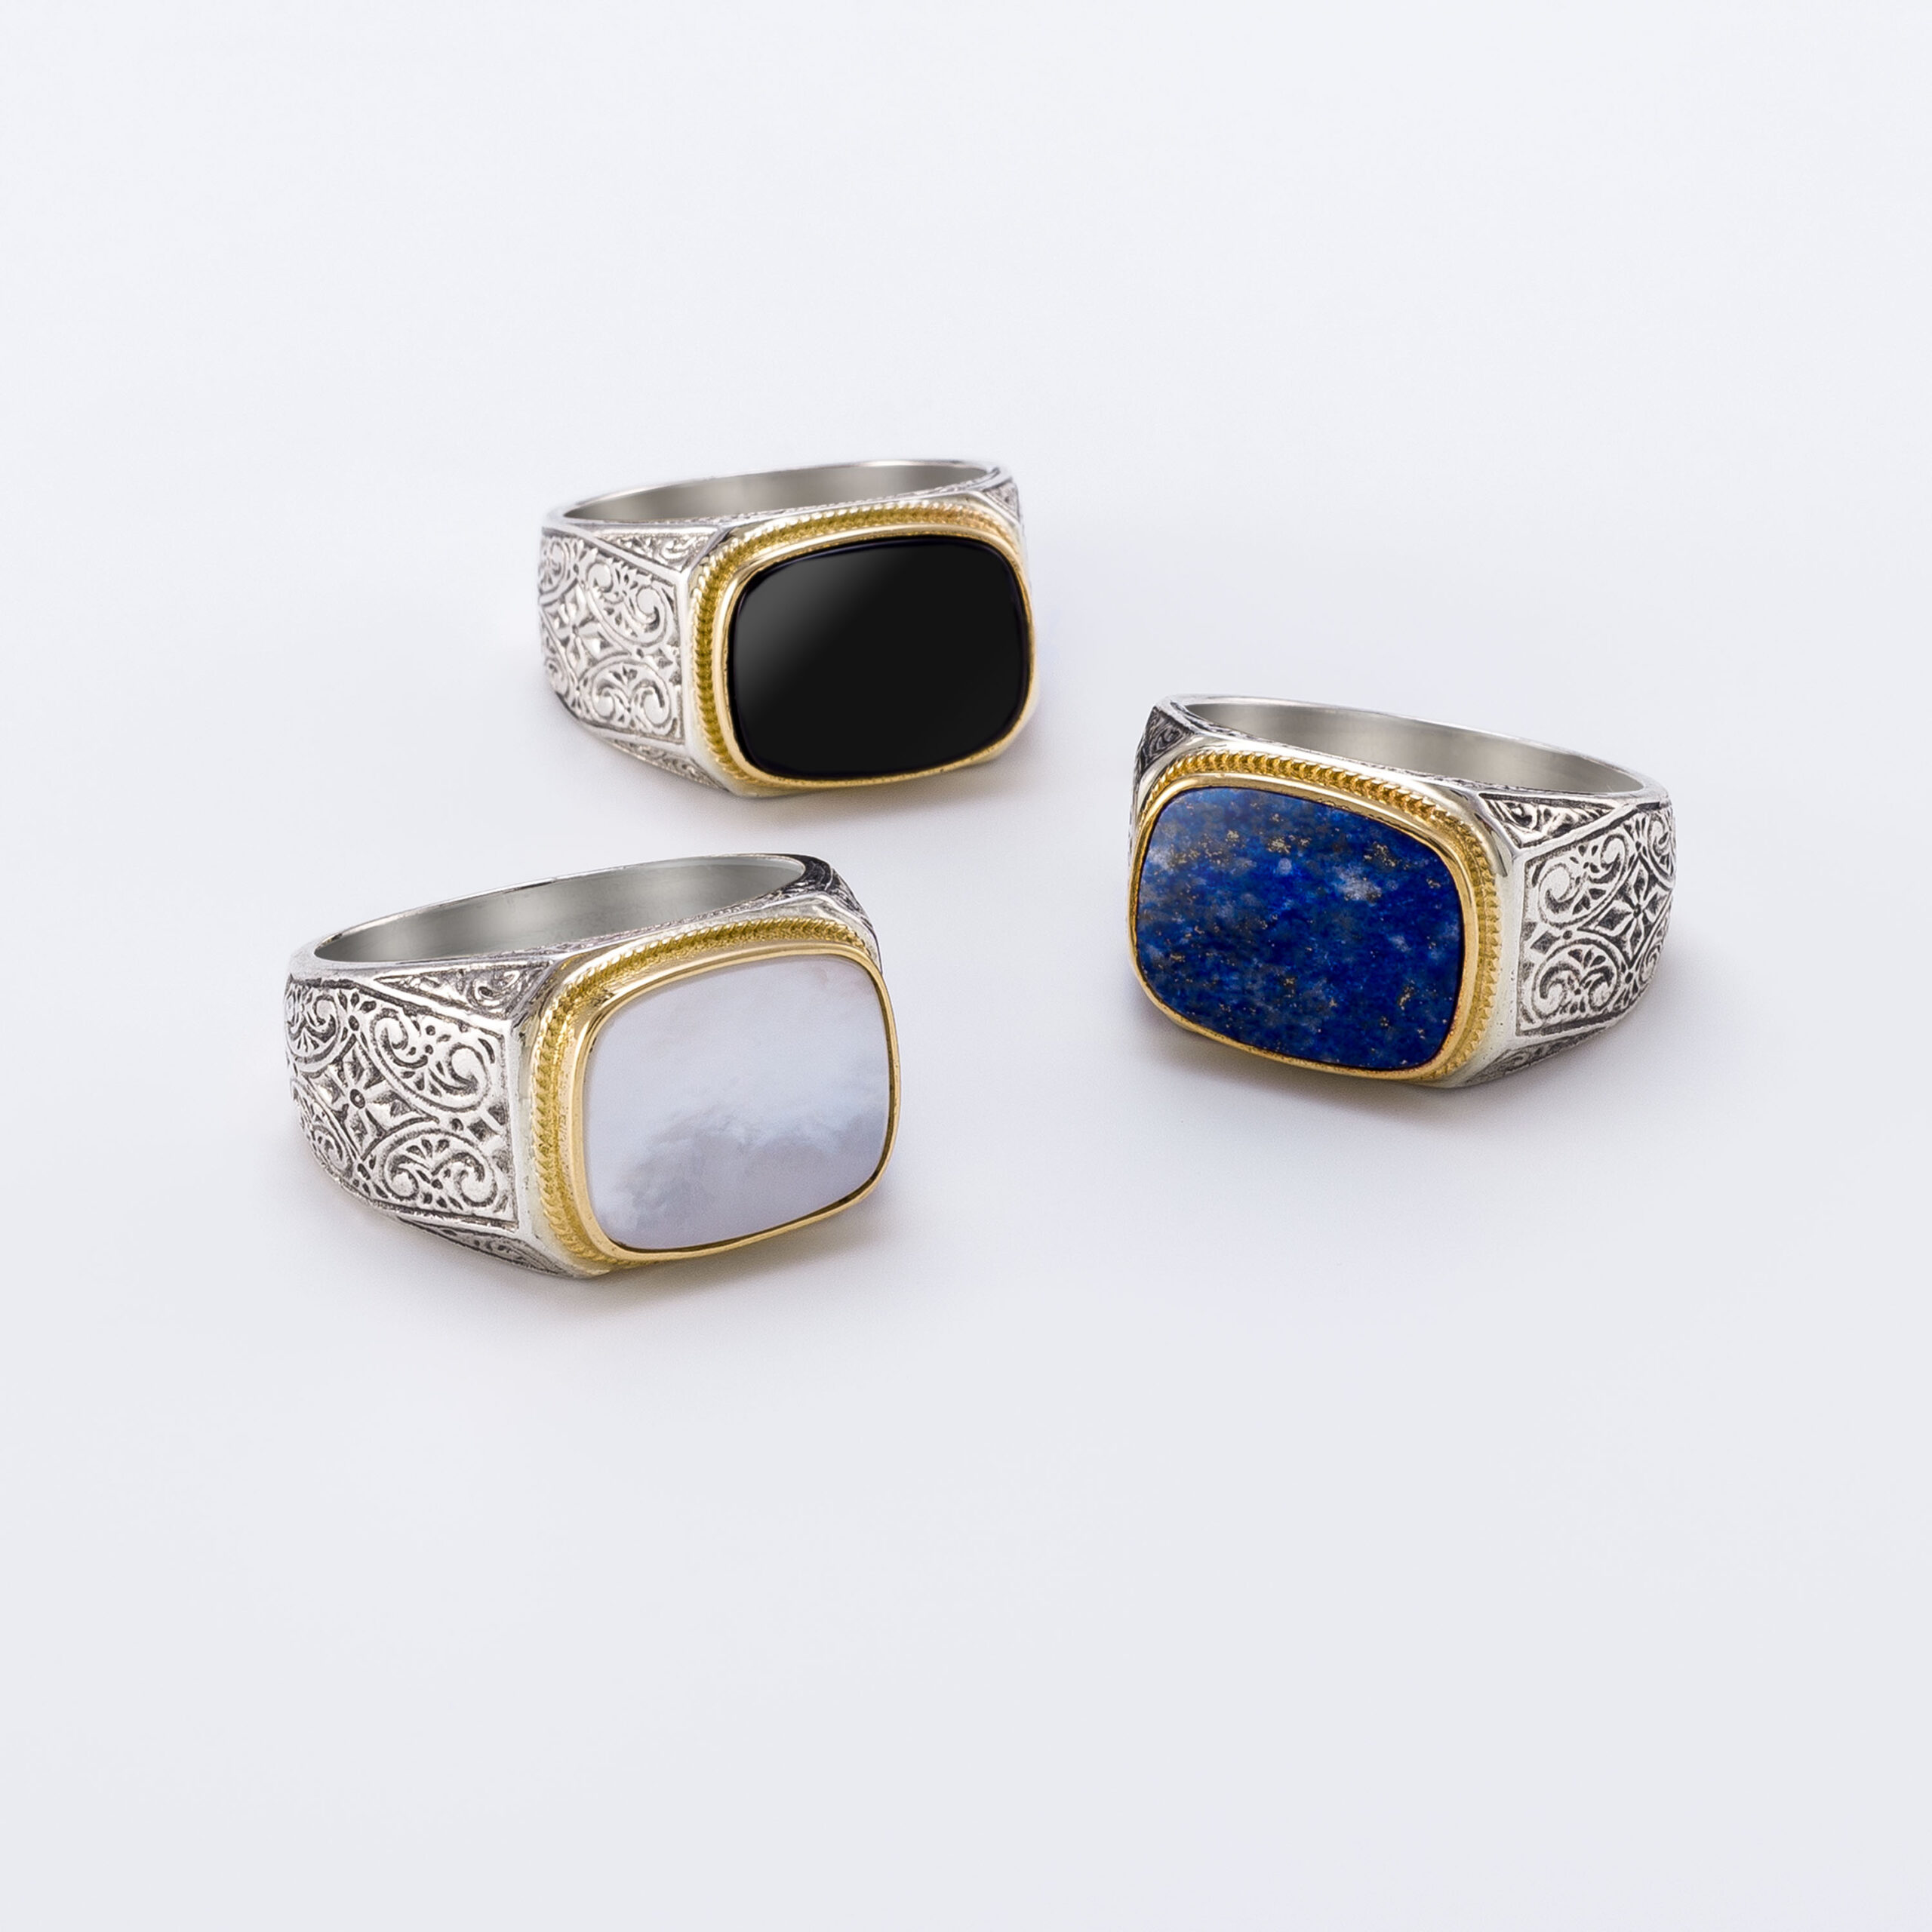 Classic ring in 18K Gold and Sterling Silver with stone